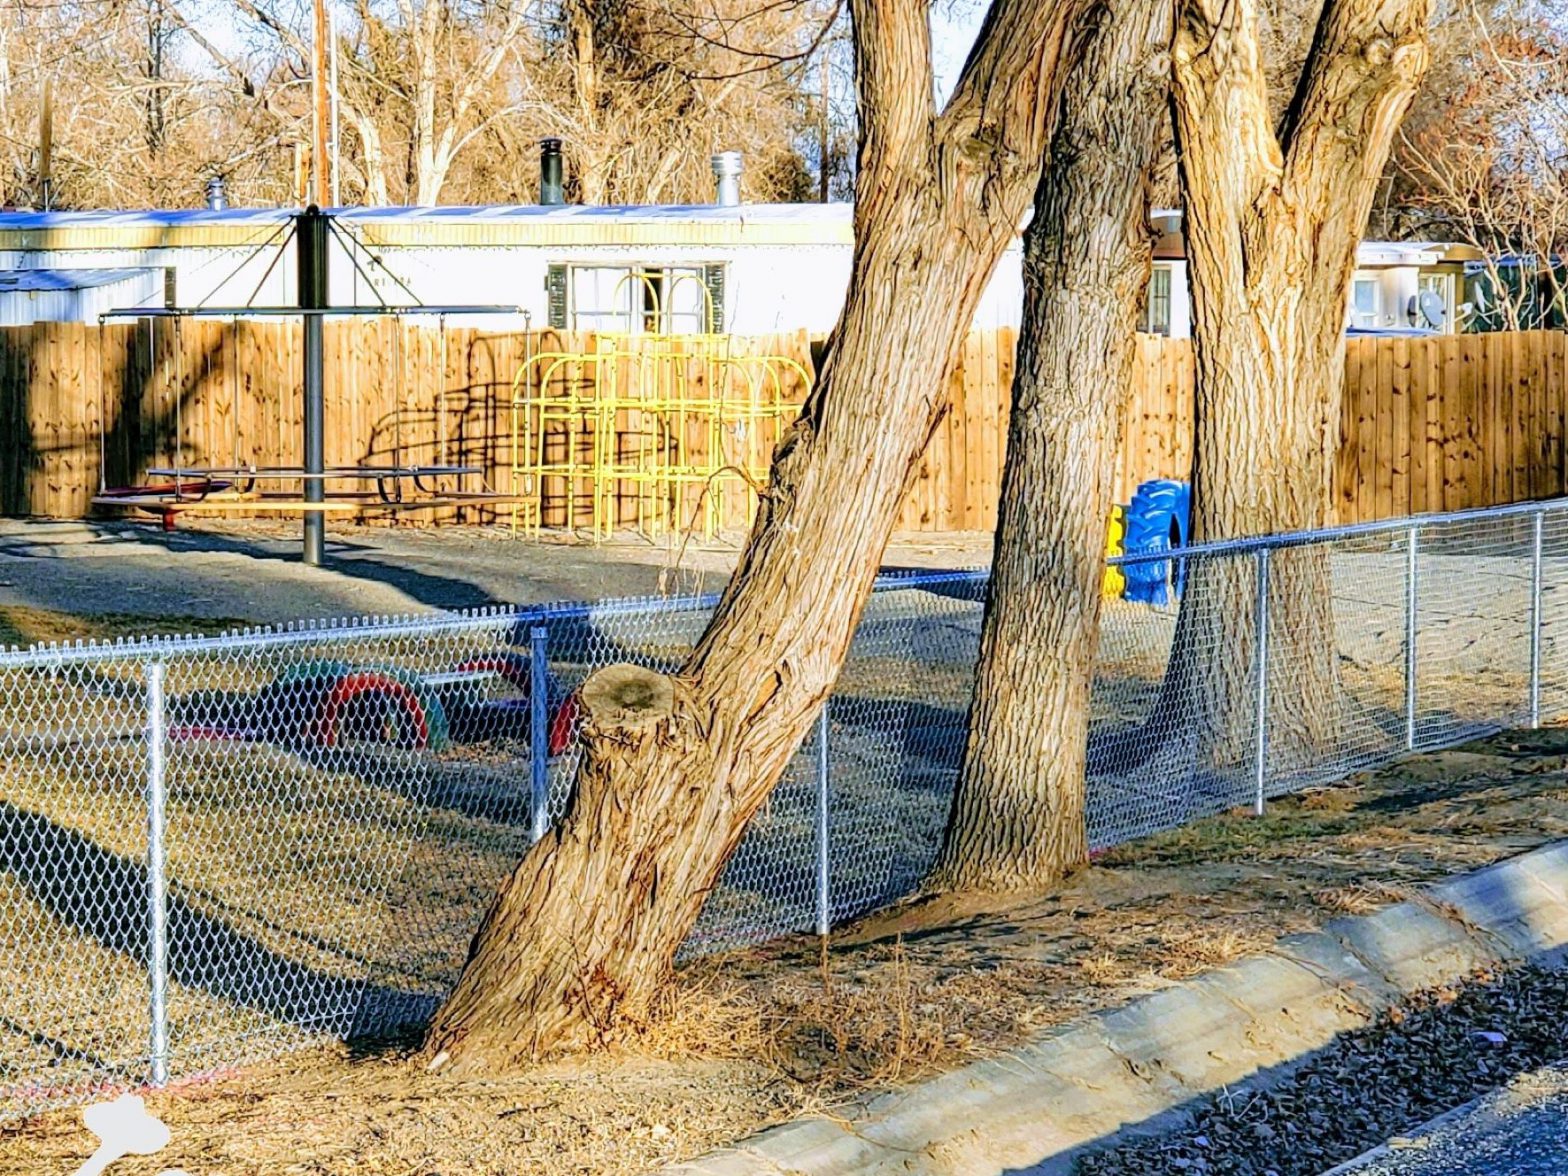 Photo of a residential chain link fence around a playground